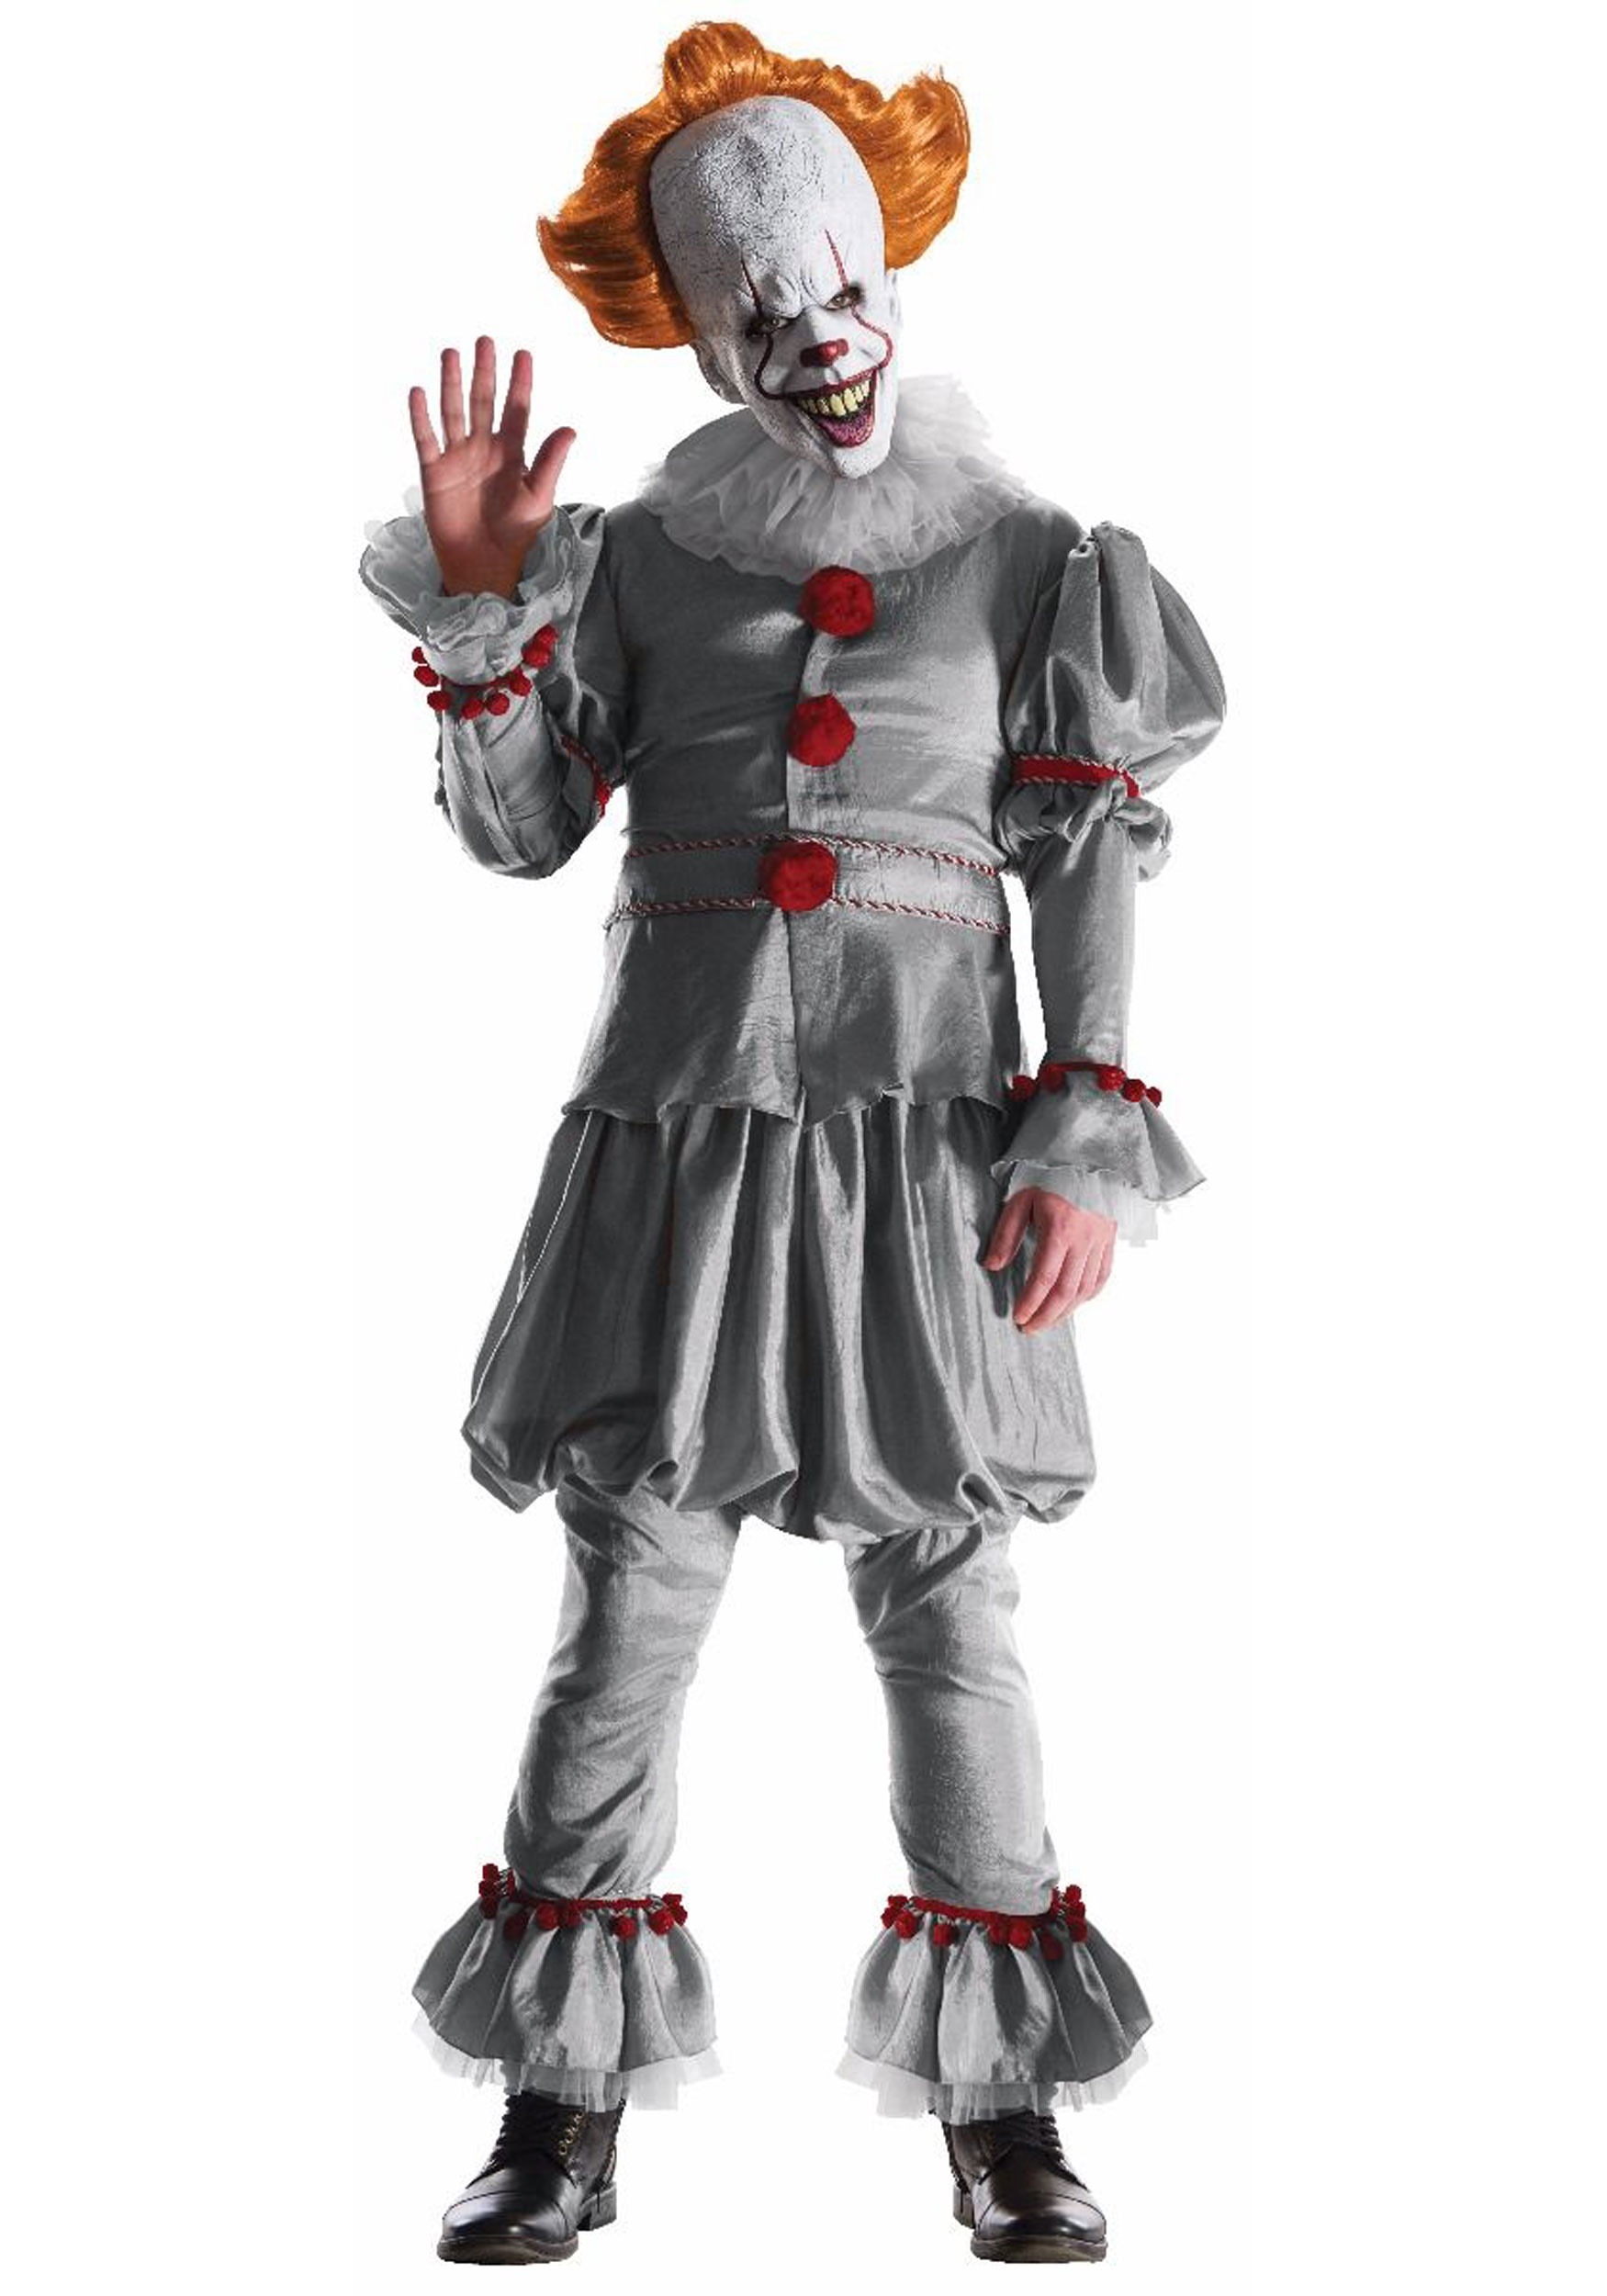 Grand Heritage Pennywise Movie Halloween Costume for Men